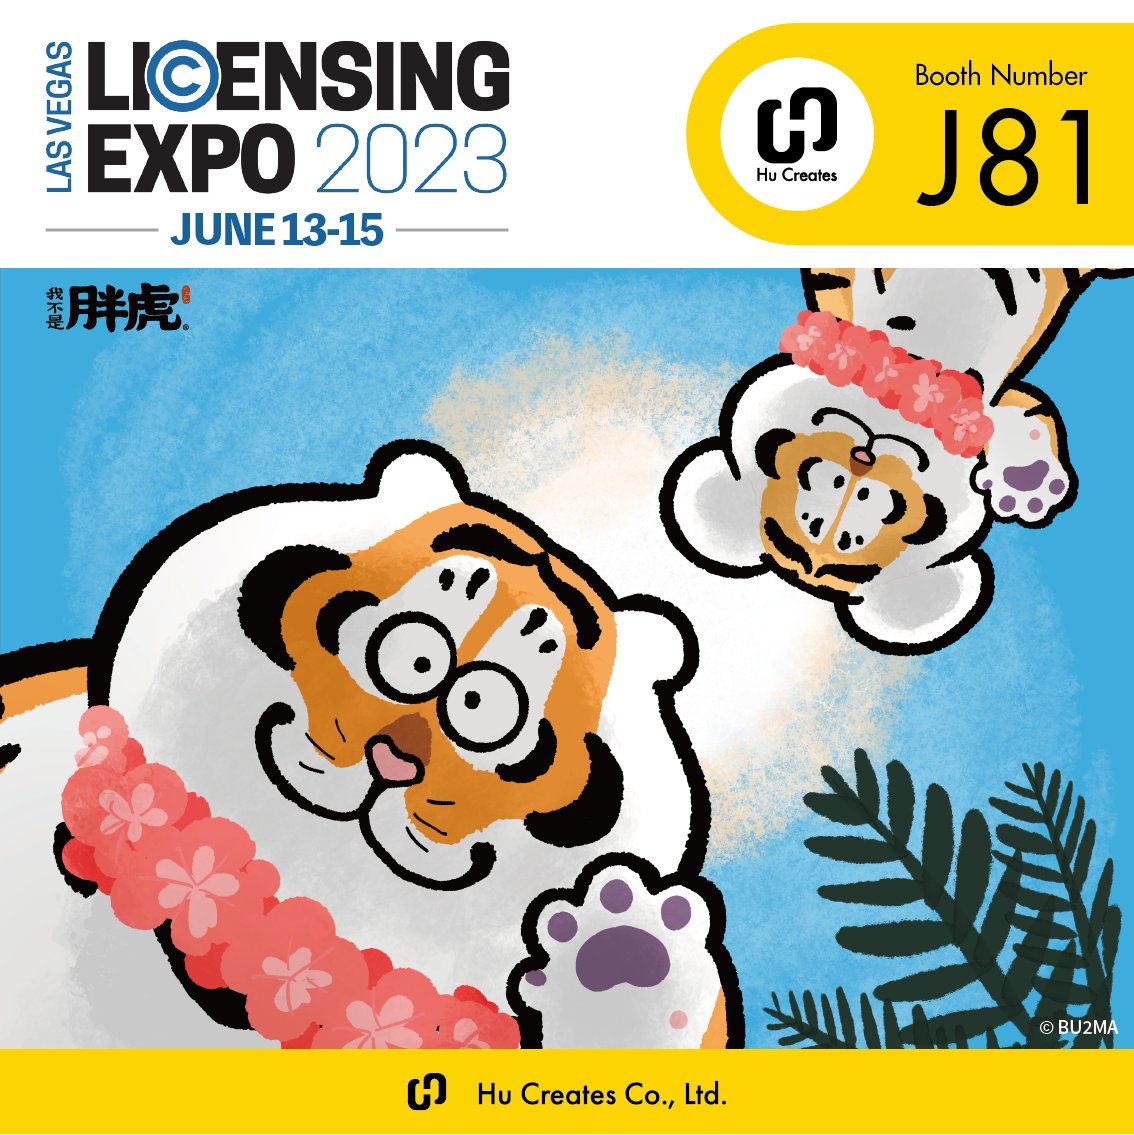 【 Licensing Expo 2023 in Las Vegas 】
​
🔺 Exhibition Date: June 13th (Tue.)-15th (Thu.), 2023
🔺 Exhibition Location: Mandalay Bay, 3950 Las Vegas Blvd S, Las Vegas, NV 89119
🔺 Booth Number: J81
🔺 Booth name: Hu Creates Co Limited
​
#licensingexpo #licensingexpo2023